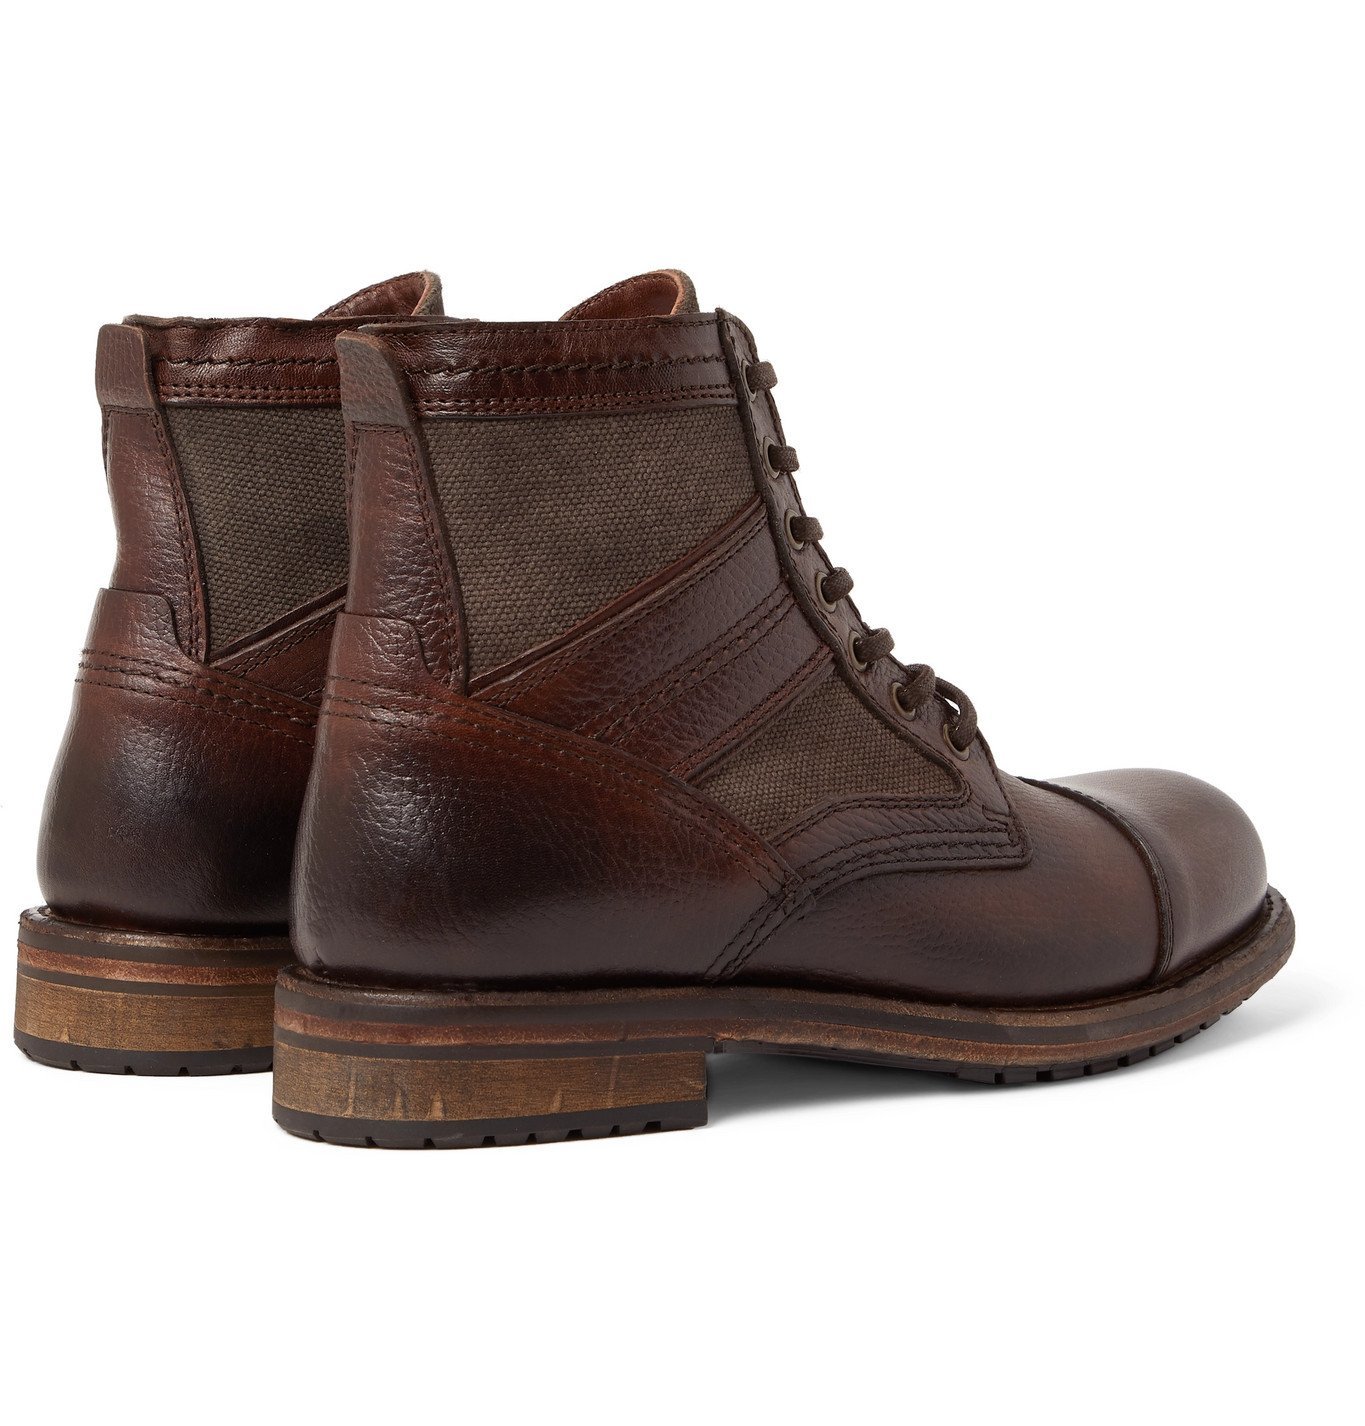 Belstaff - Trent Canvas and Full-Grain Leather Boots - Brown Belstaff